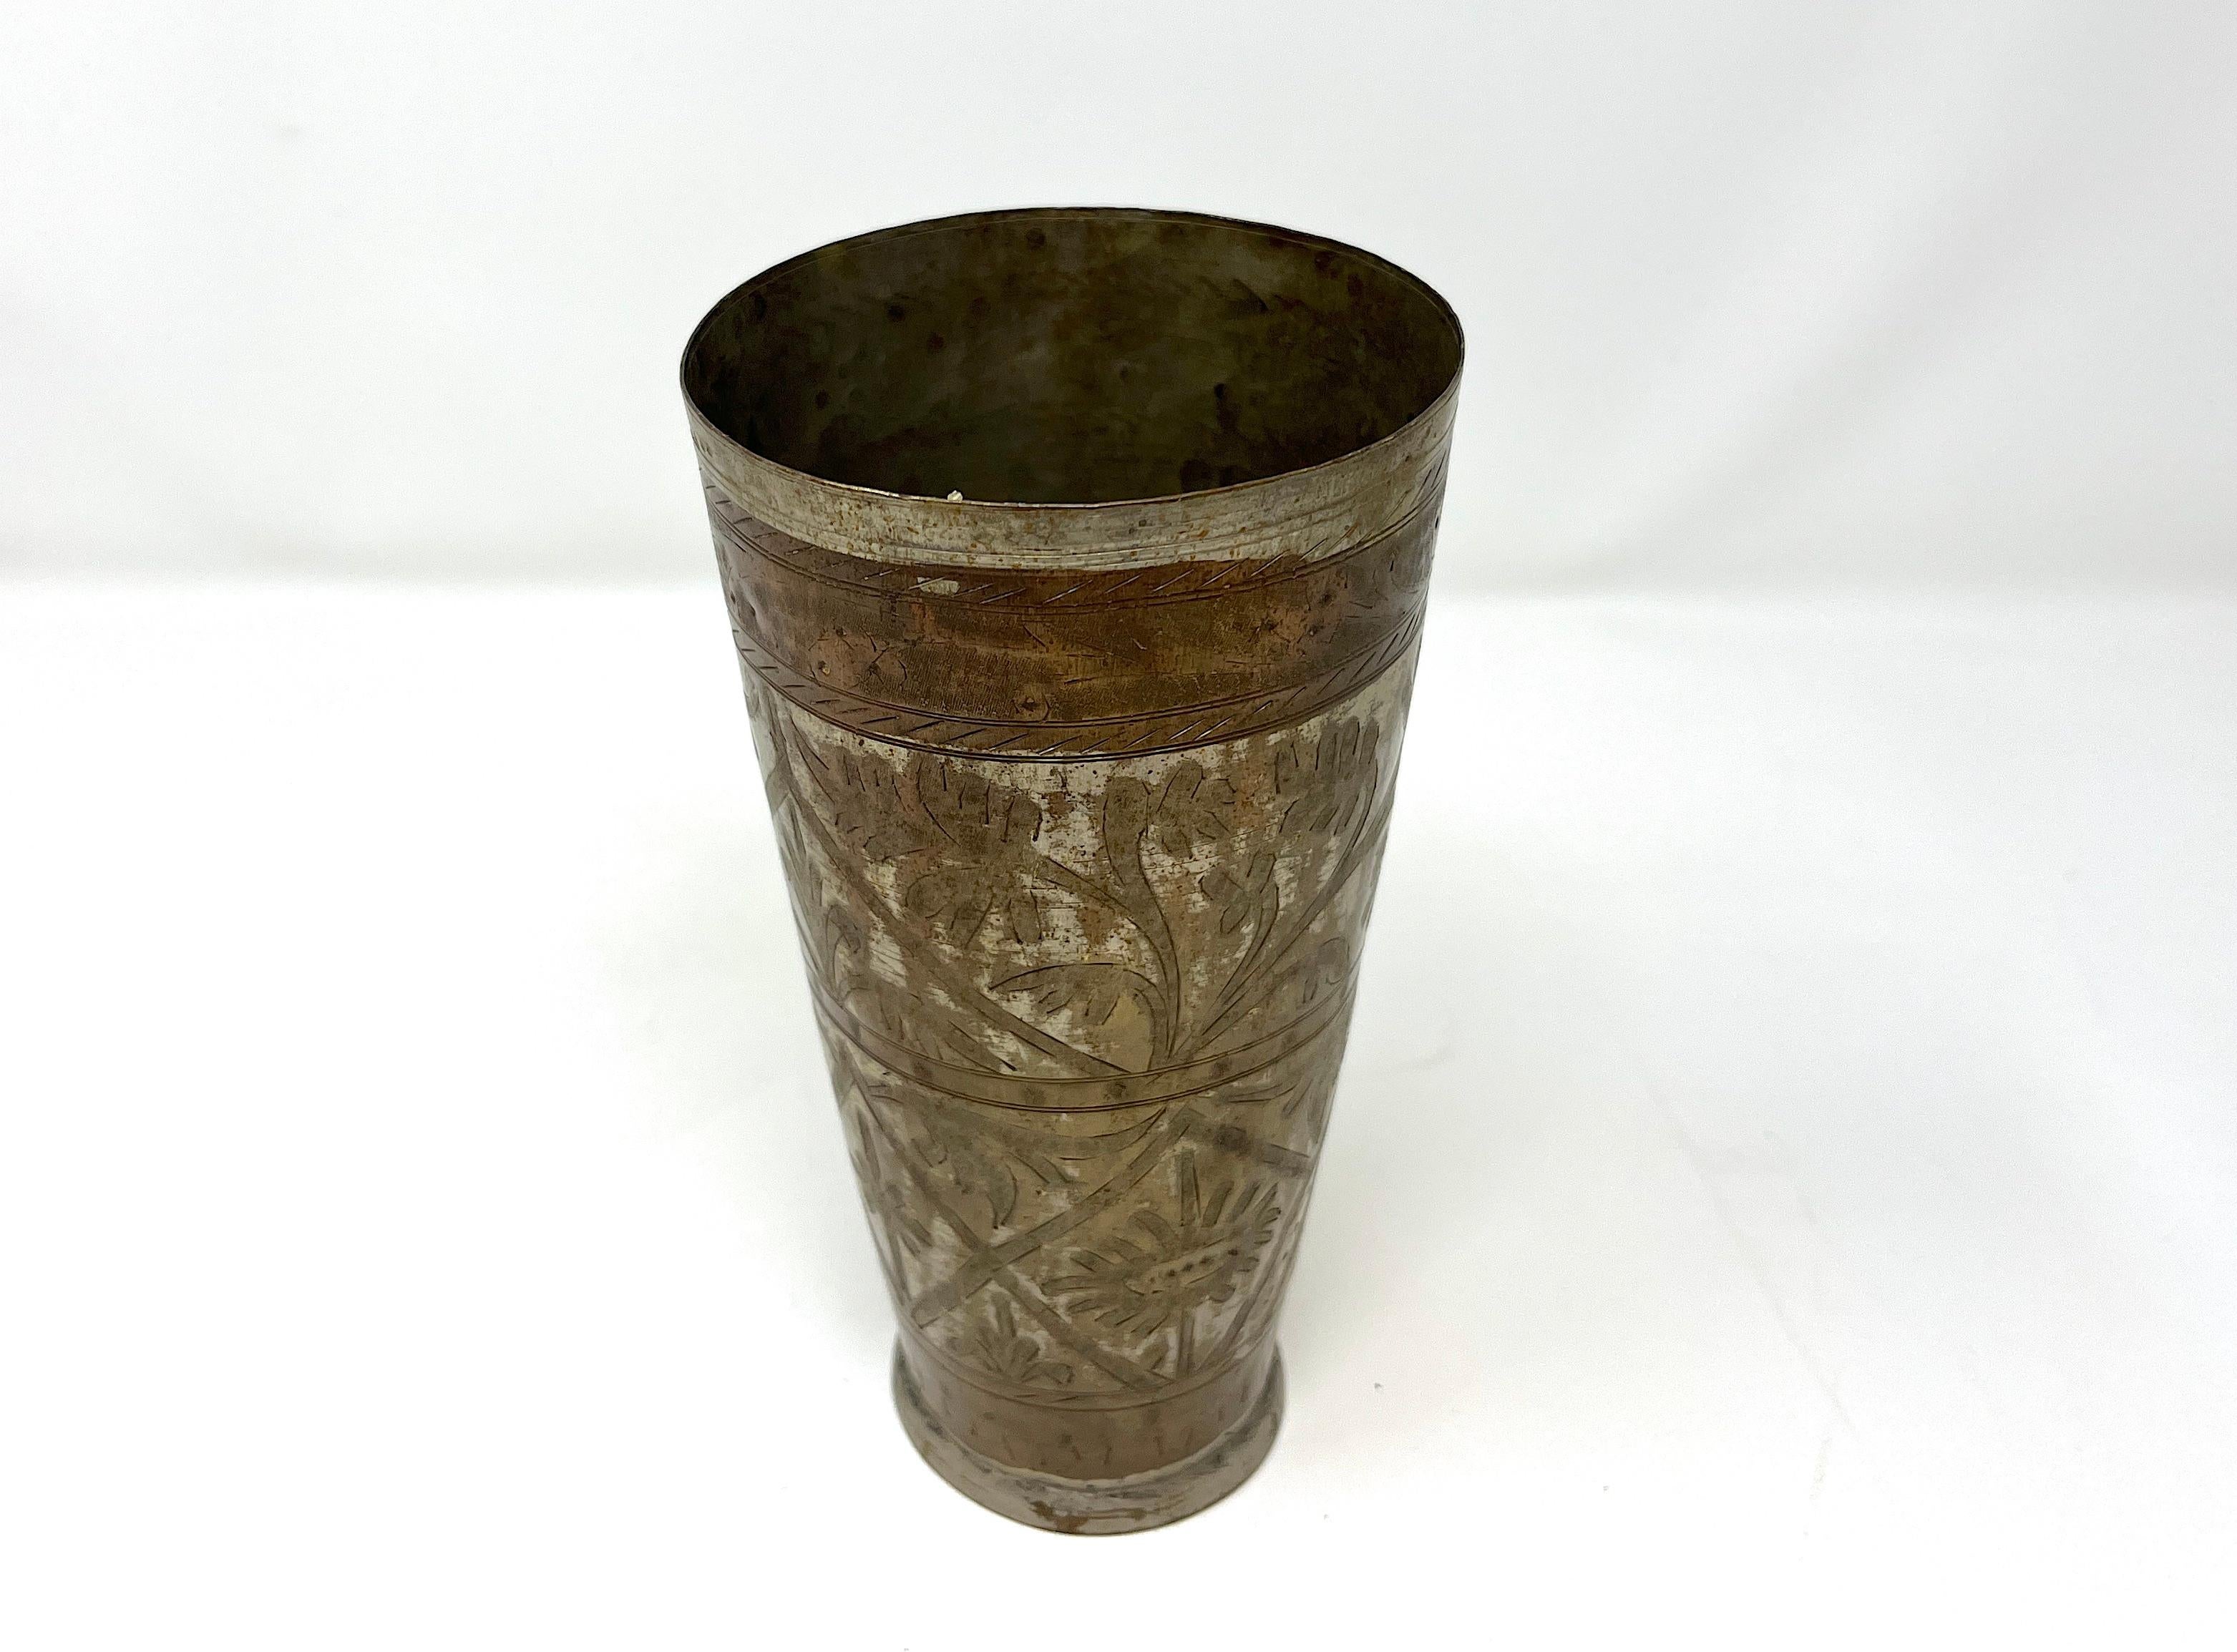 Hand hammered silvered metal and brass engraved beaker beautifully hand chiseled and decorated with geometrical and botanical patterns. One-of-a-kind old Islamic Mughal style lassi drinking cup from India, beautifully hand etched by artisan. The